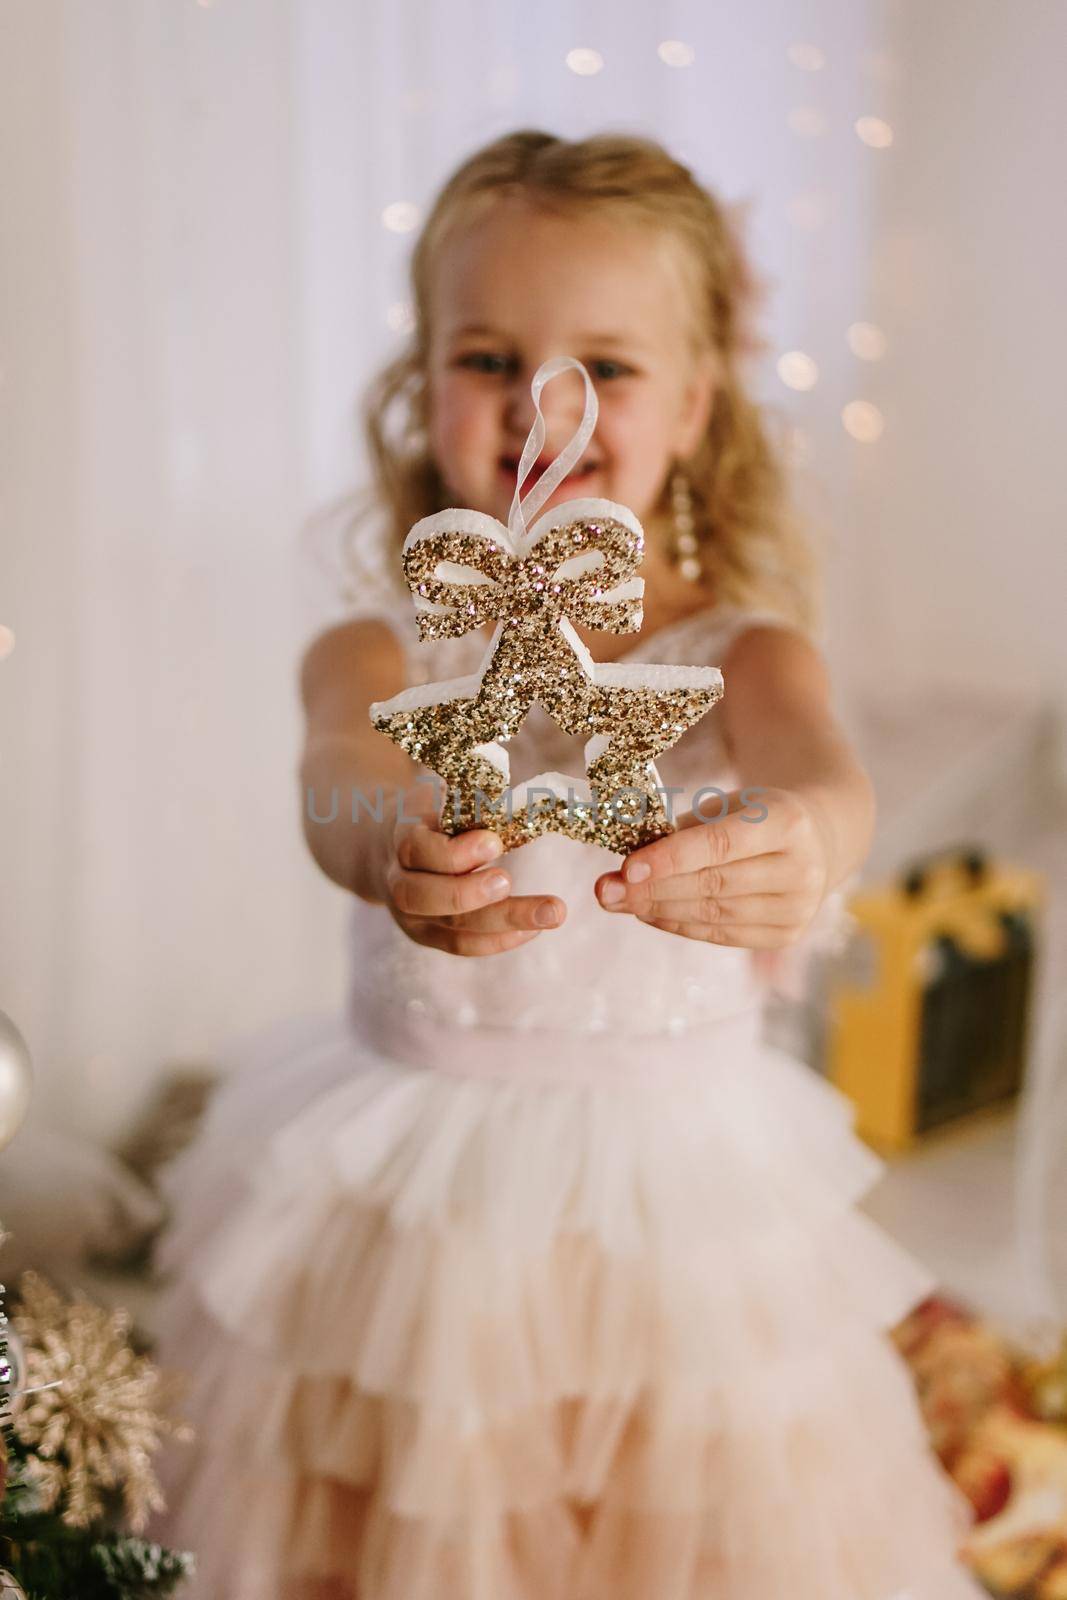 Little cute girl with a Christmas star in her hands smiling on the background of Christmas decor.